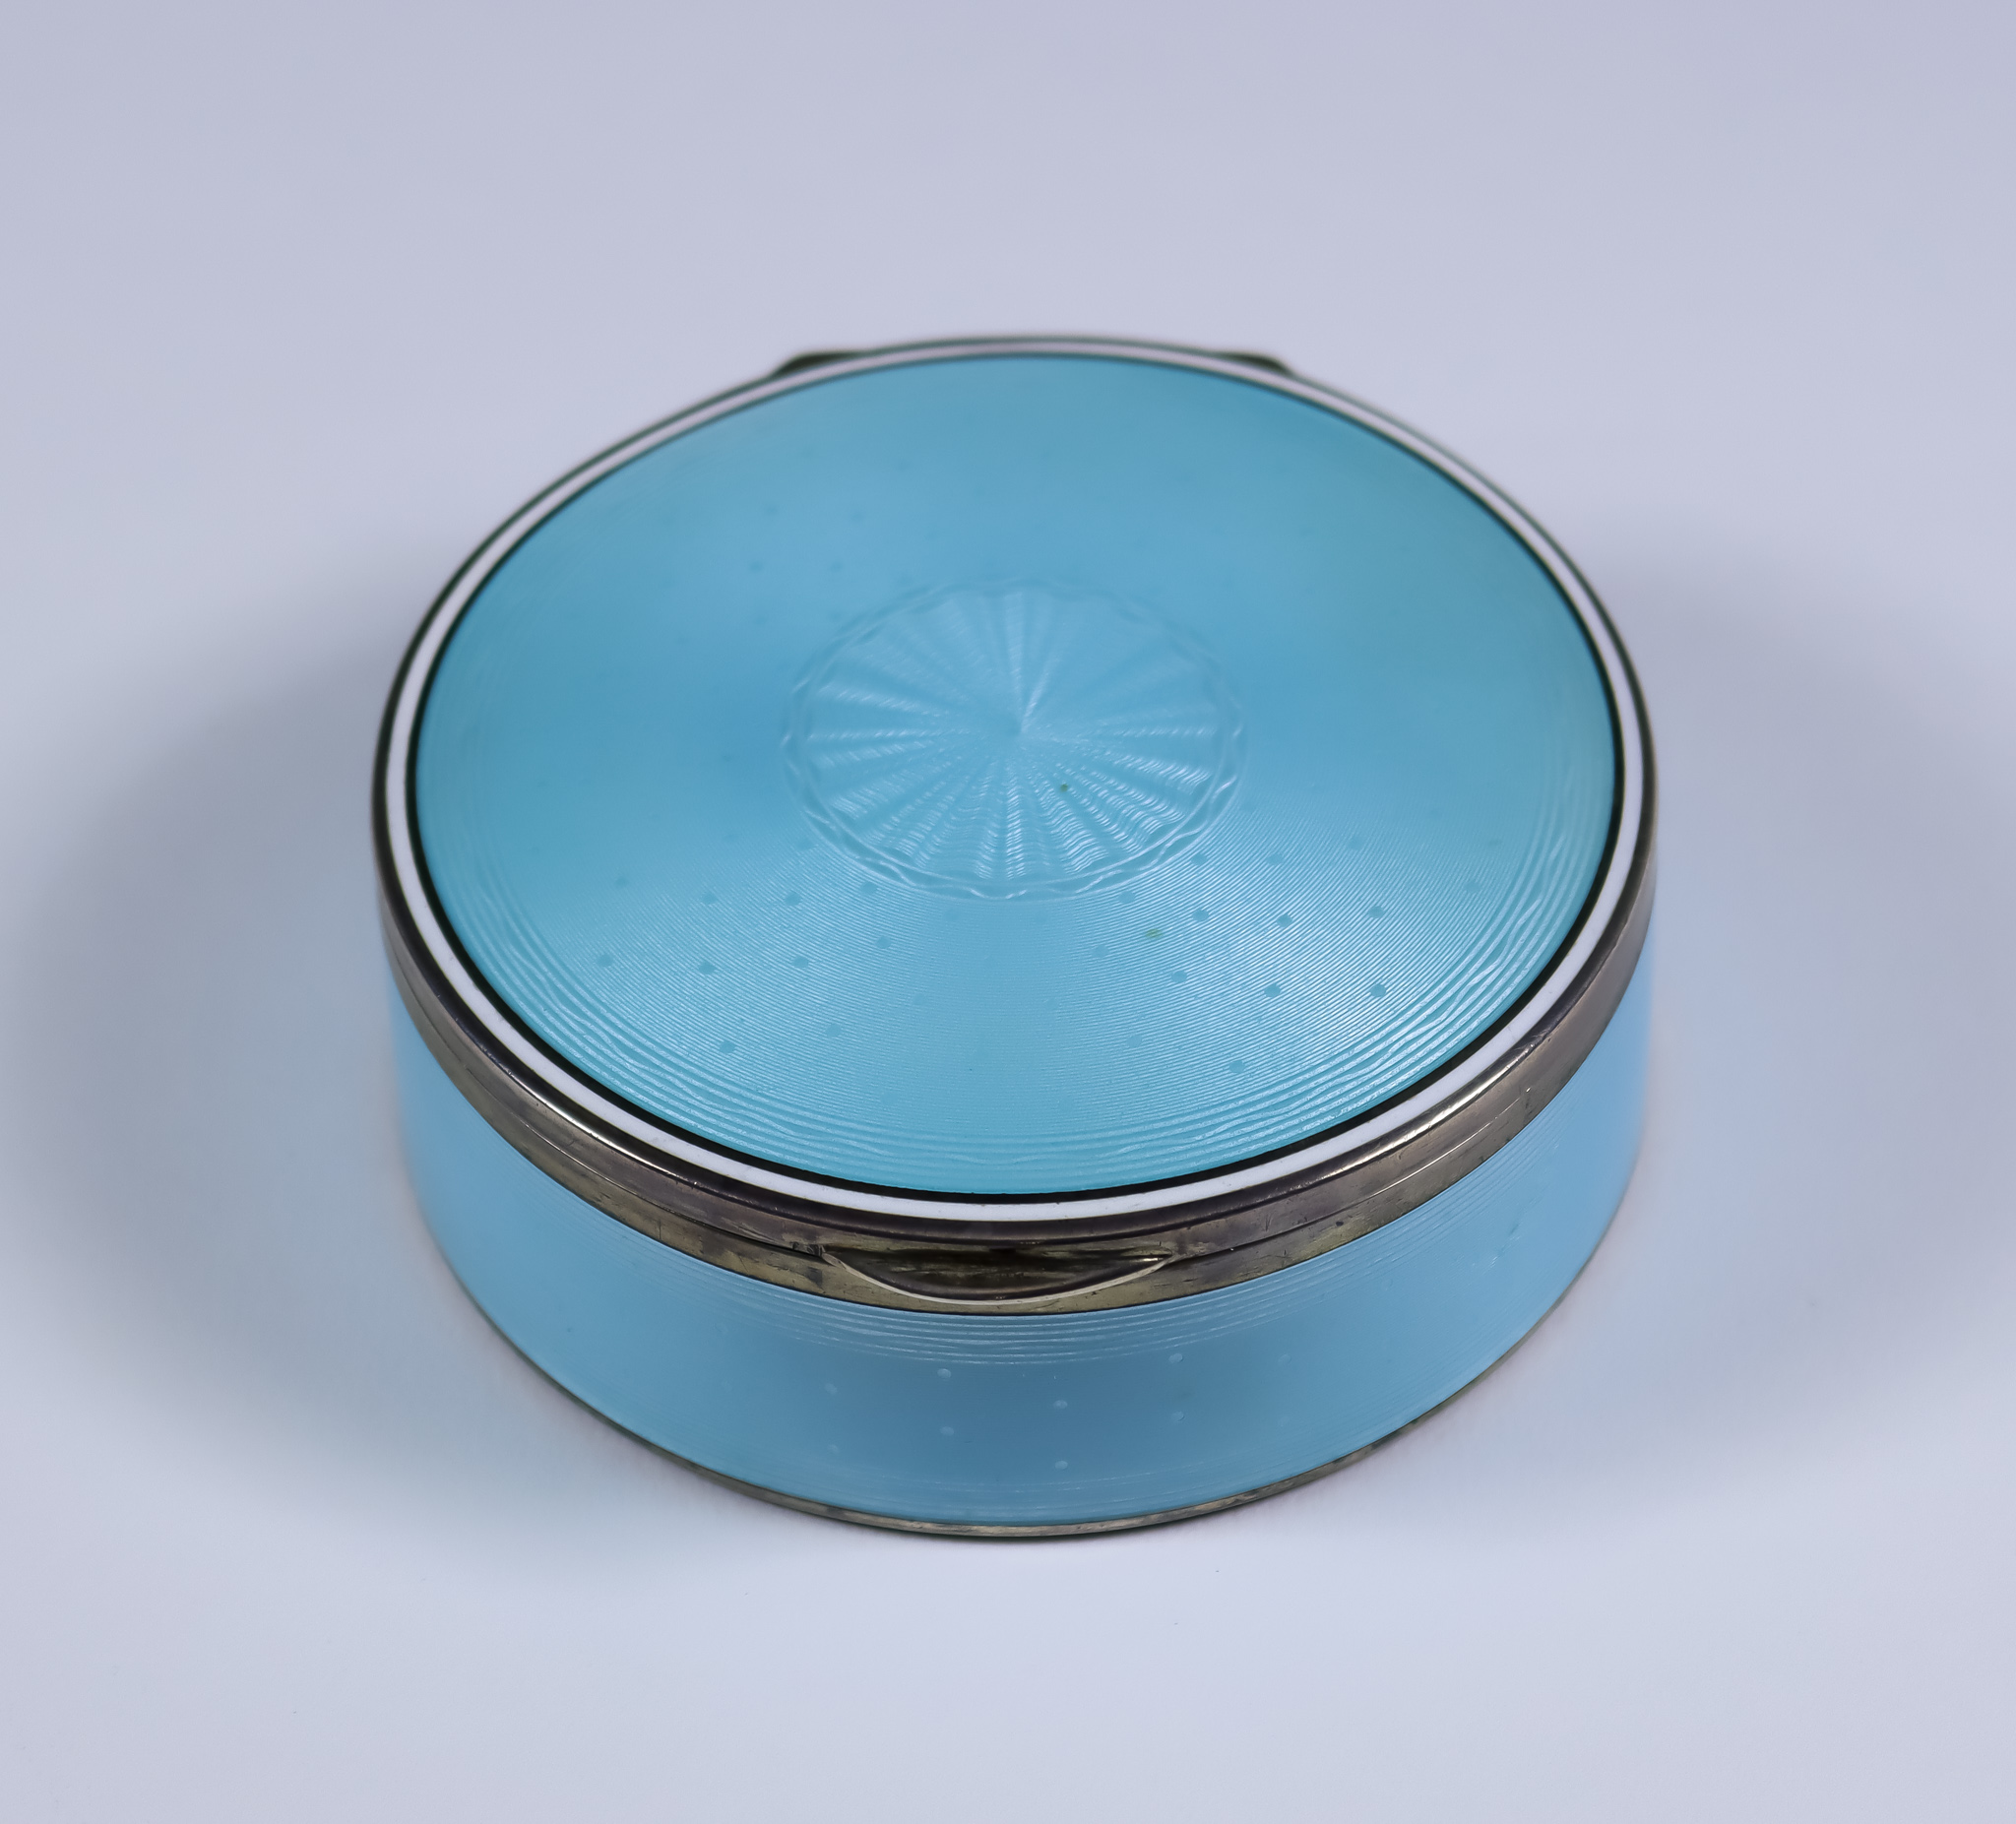 A Late 19th/Early 20th Century Austrian Silver, Silver Gilt and Pale Blue Enamel Circular Box, by